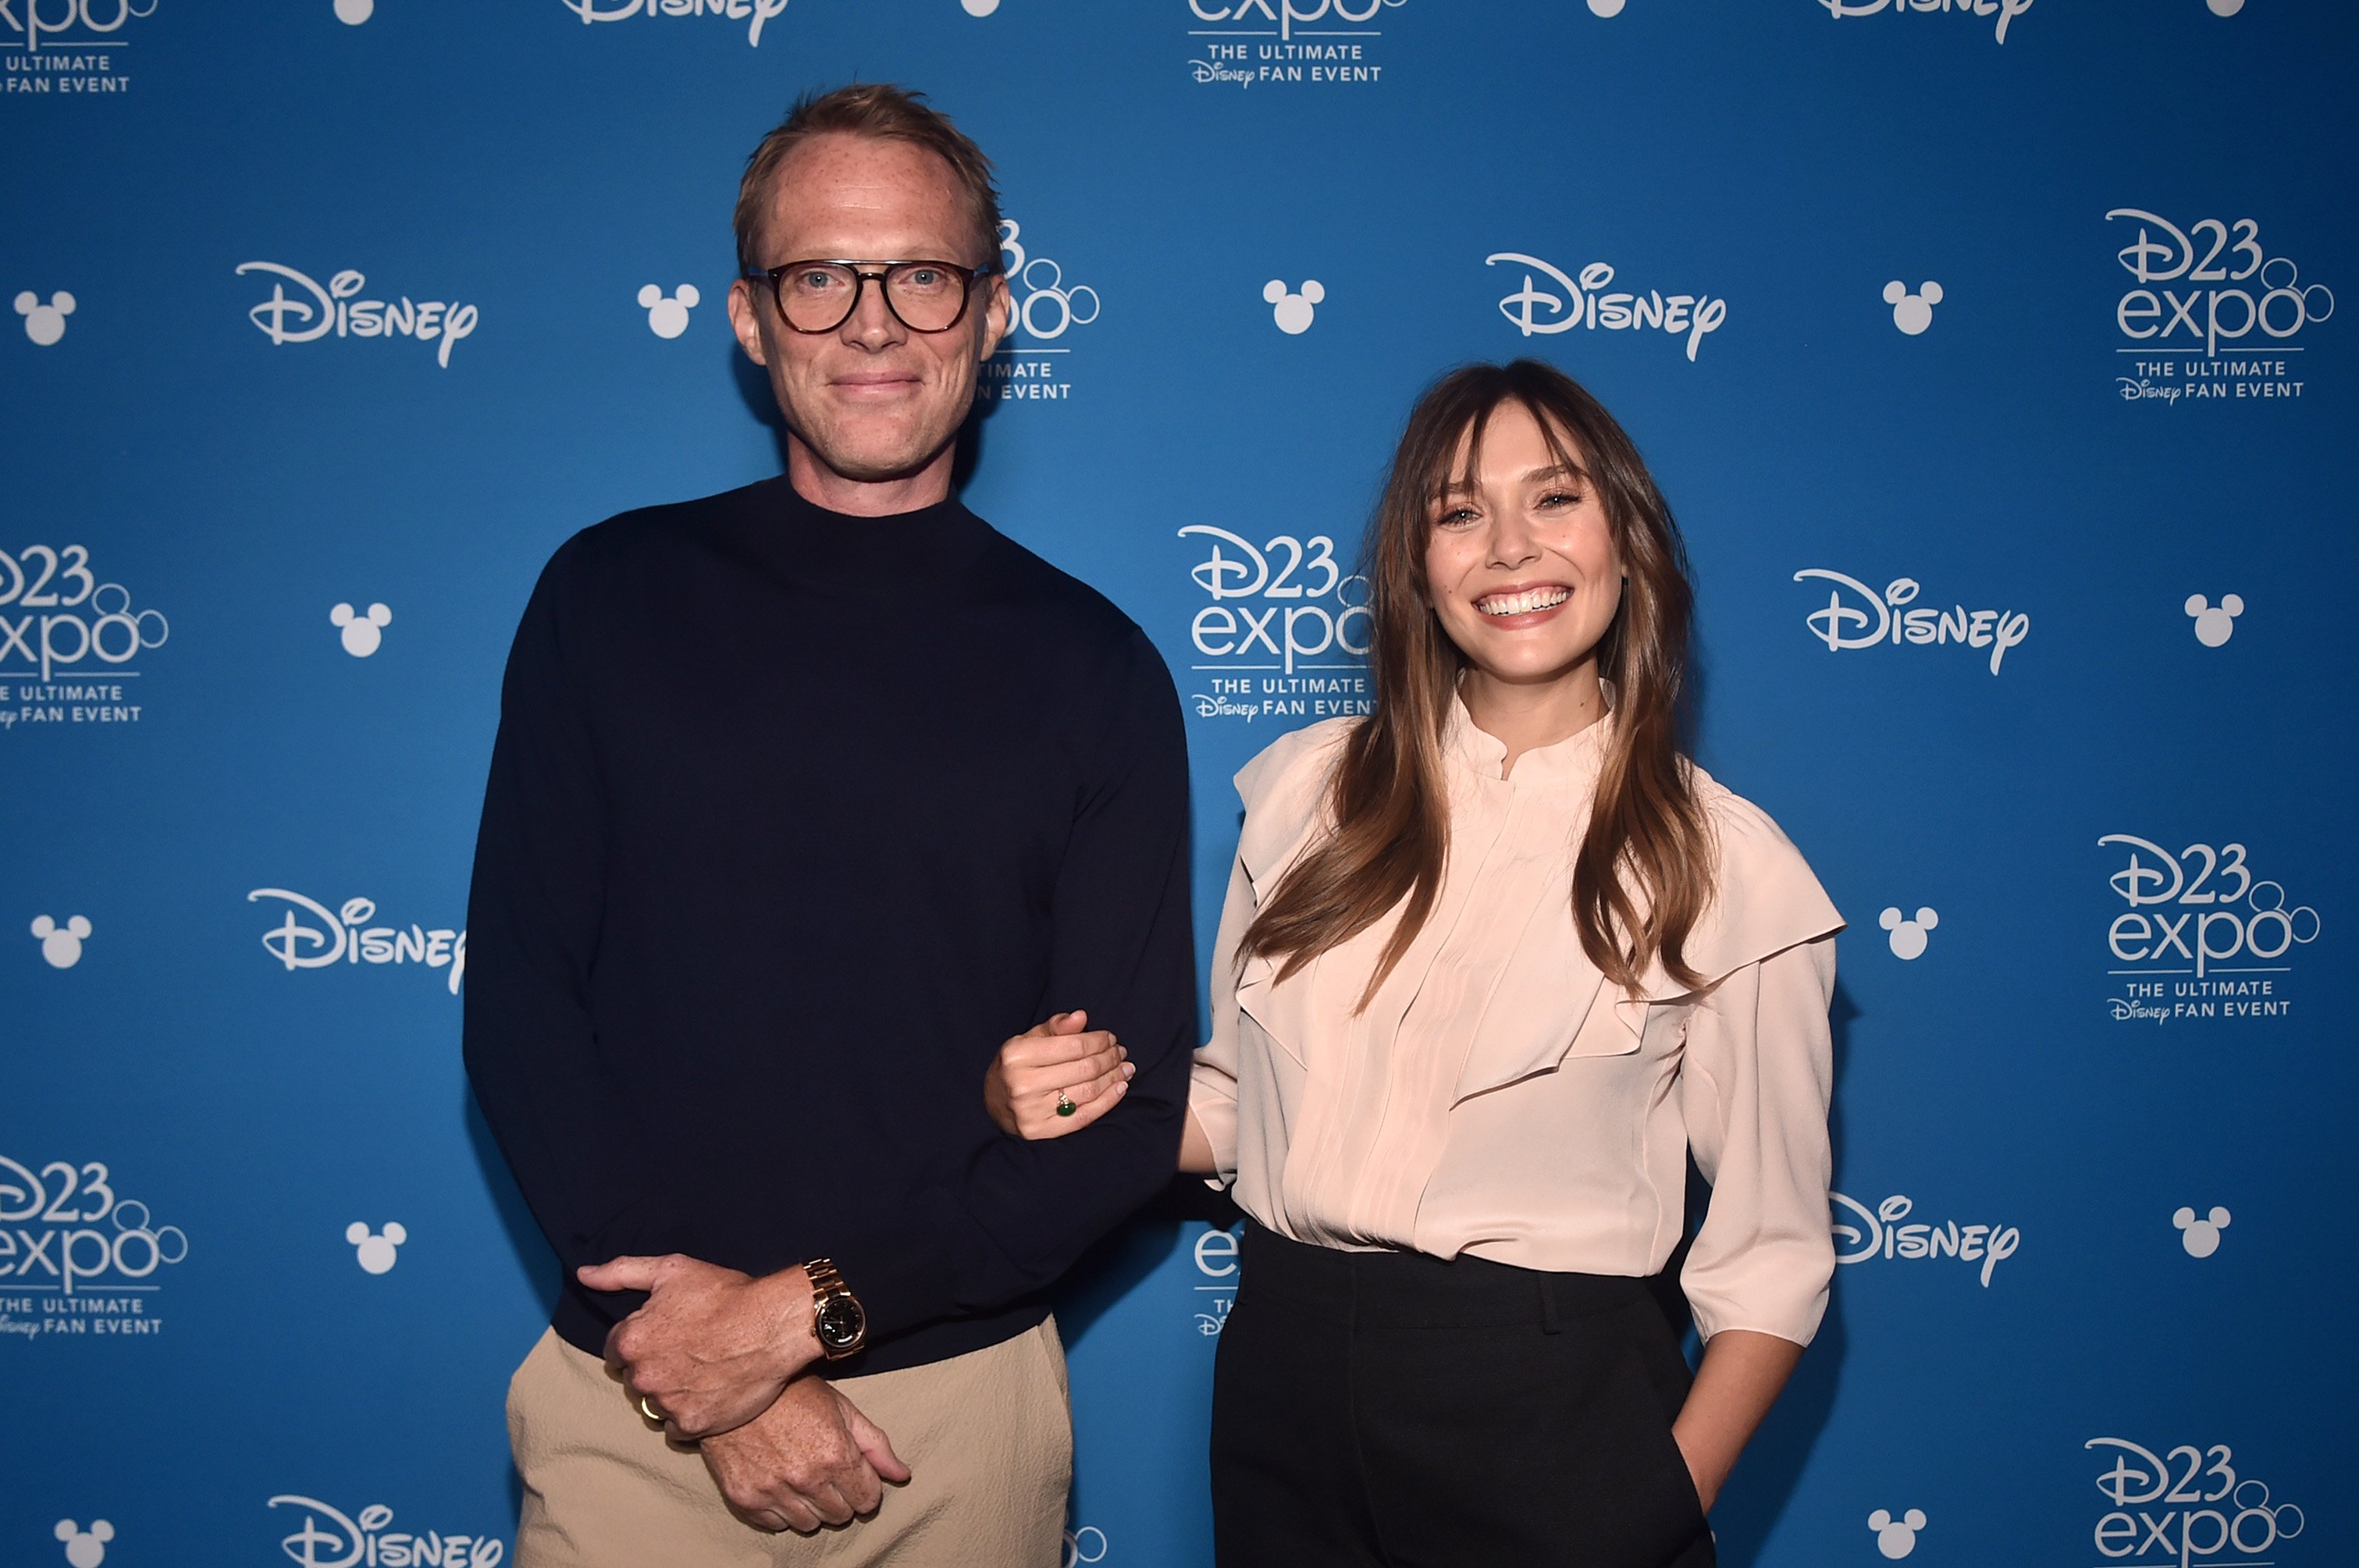 Paul Bettany and Elizabeth Olsen of 'WandaVision' took part today in the Disney+ Showcase at Disney’s D23 EXPO 2019